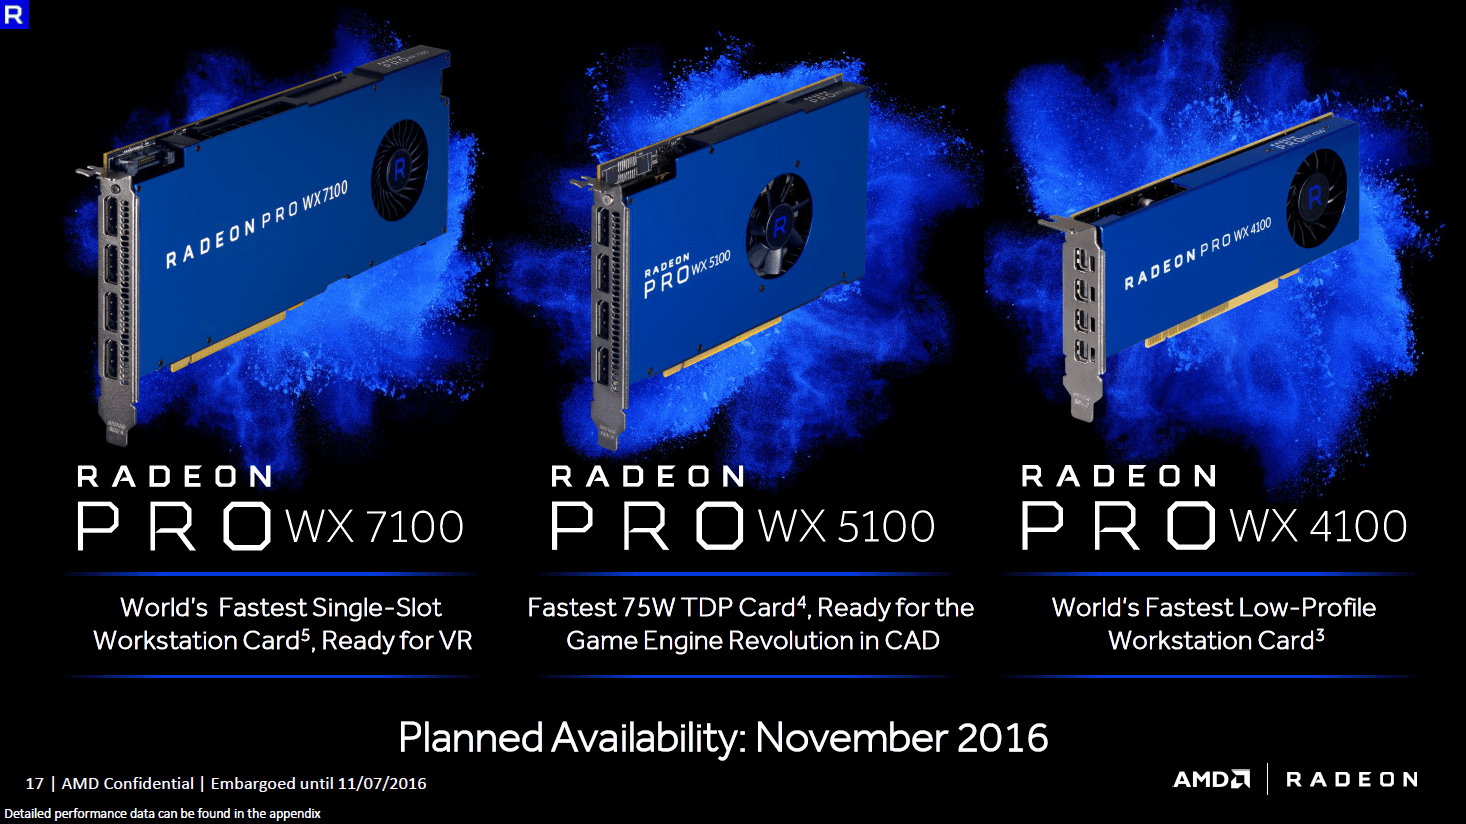 AMD announces availability of Radeon Pro WX 7100, WX 5100 and WX